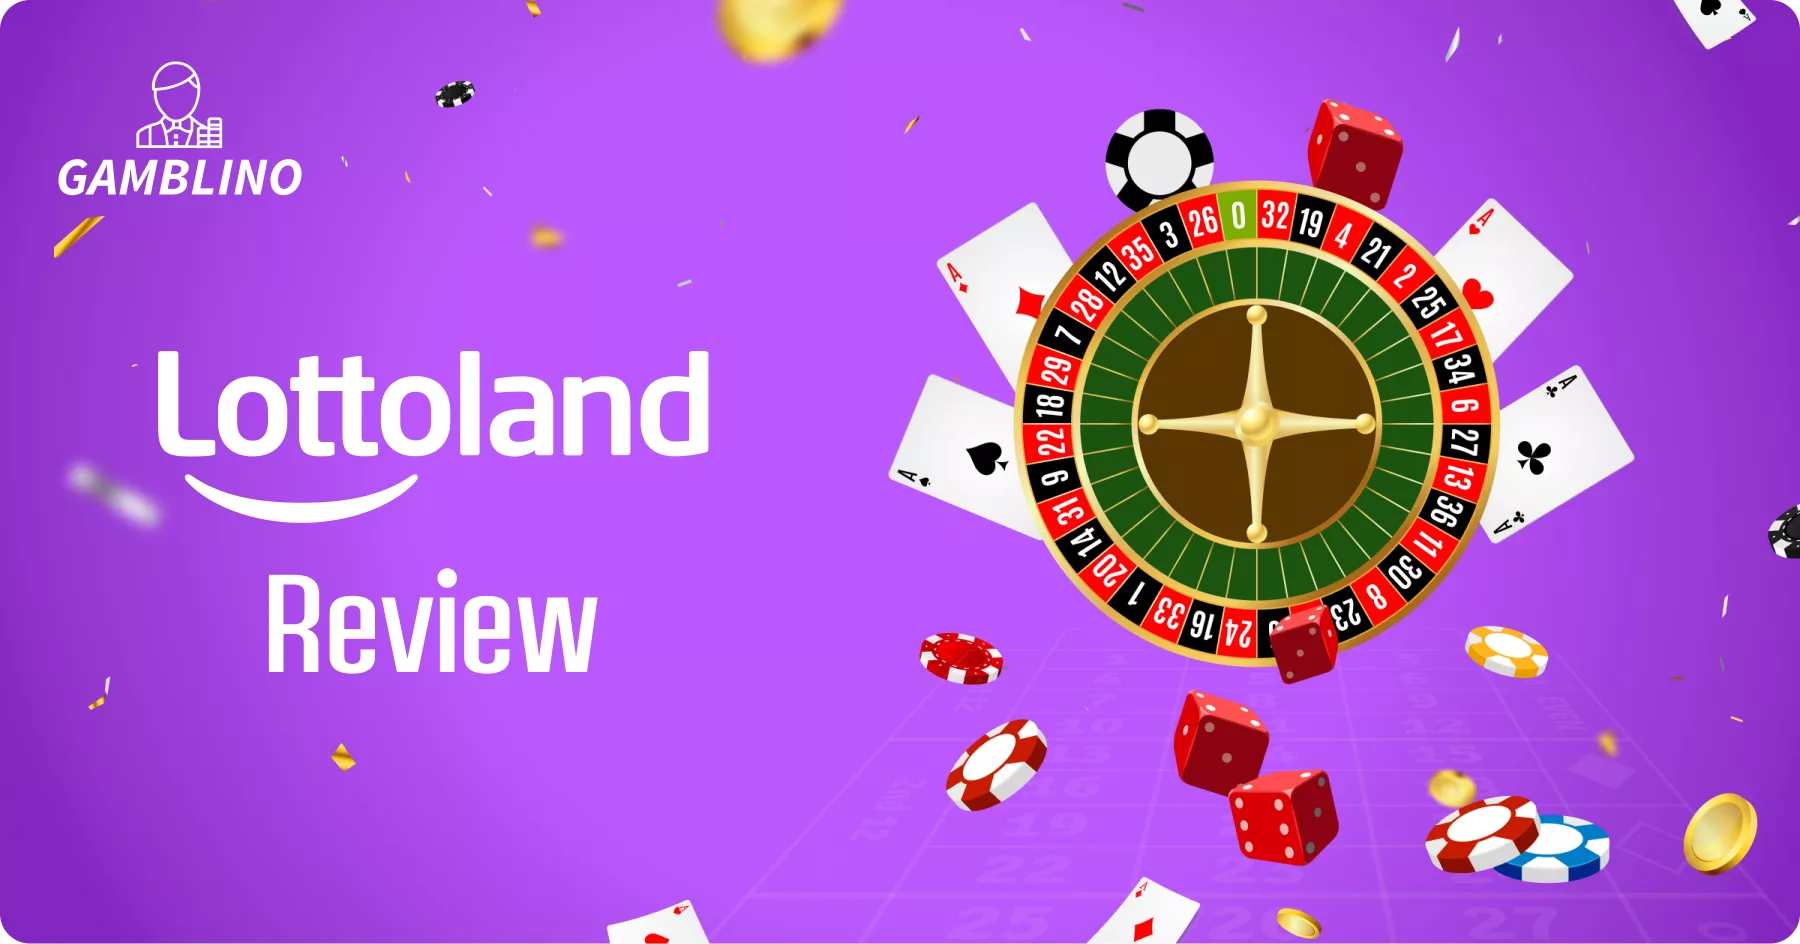 the indian online lottery lottoland and their logo together with several online casino games